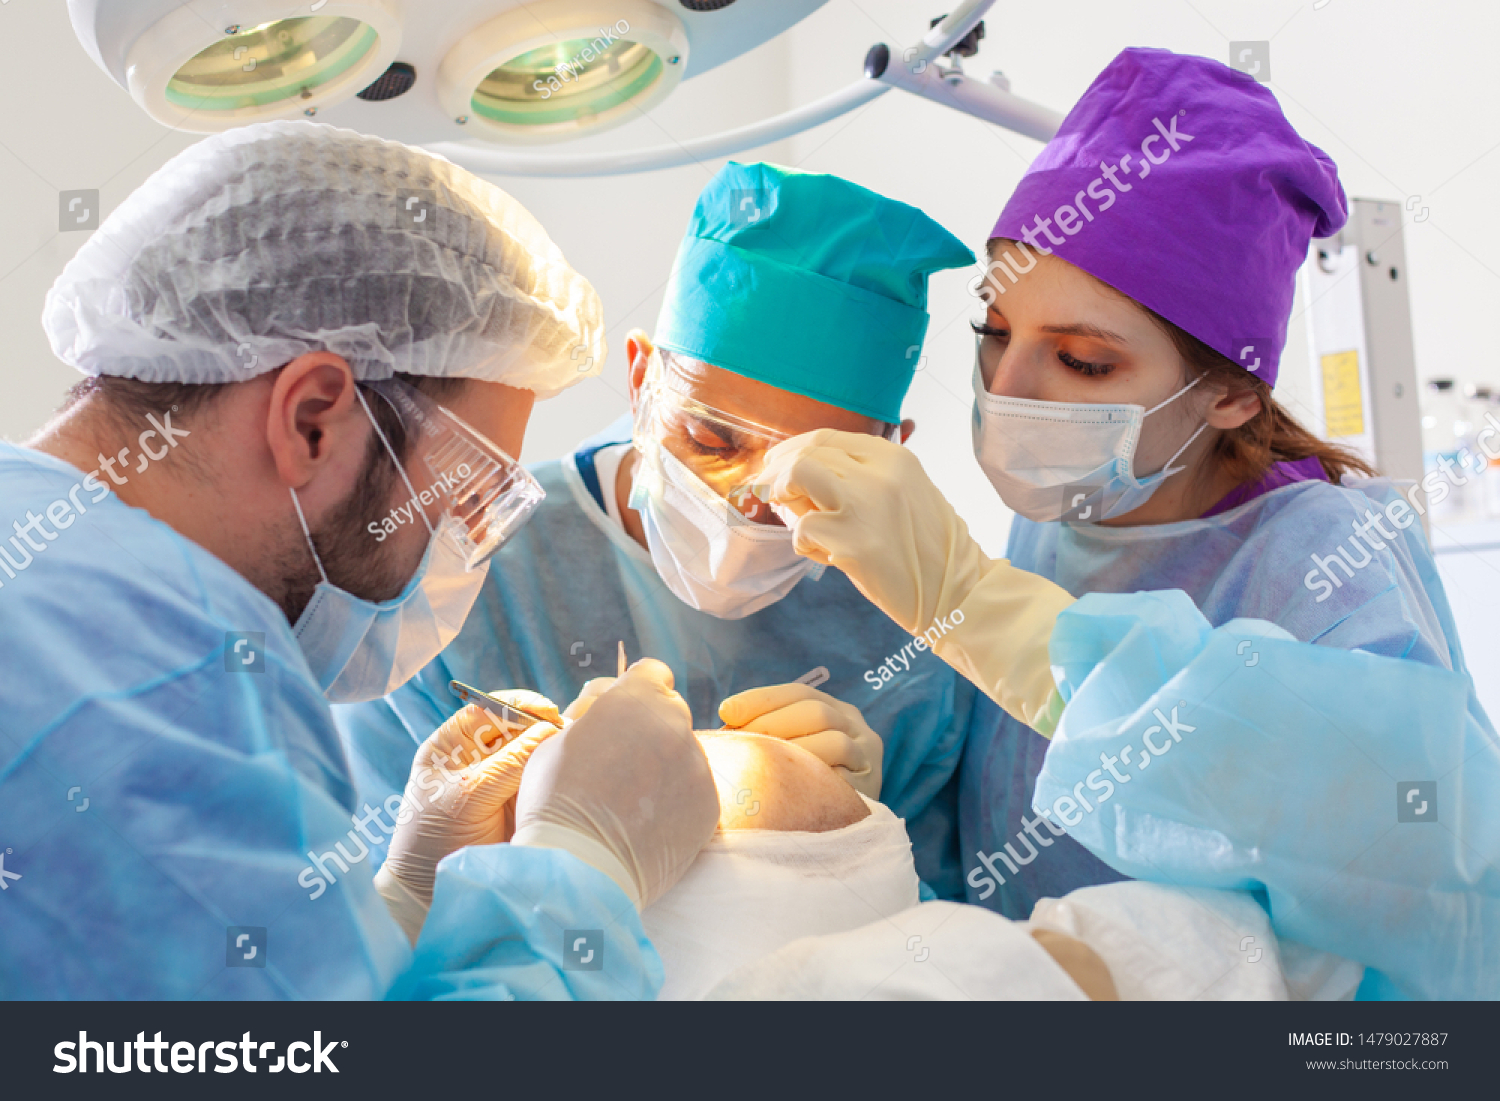 Baldness treatment. Hair transplant. Surgeons in the operating room carry out hair transplant surgery. Surgical technique that moves hair follicles from a part of the head. #1479027887